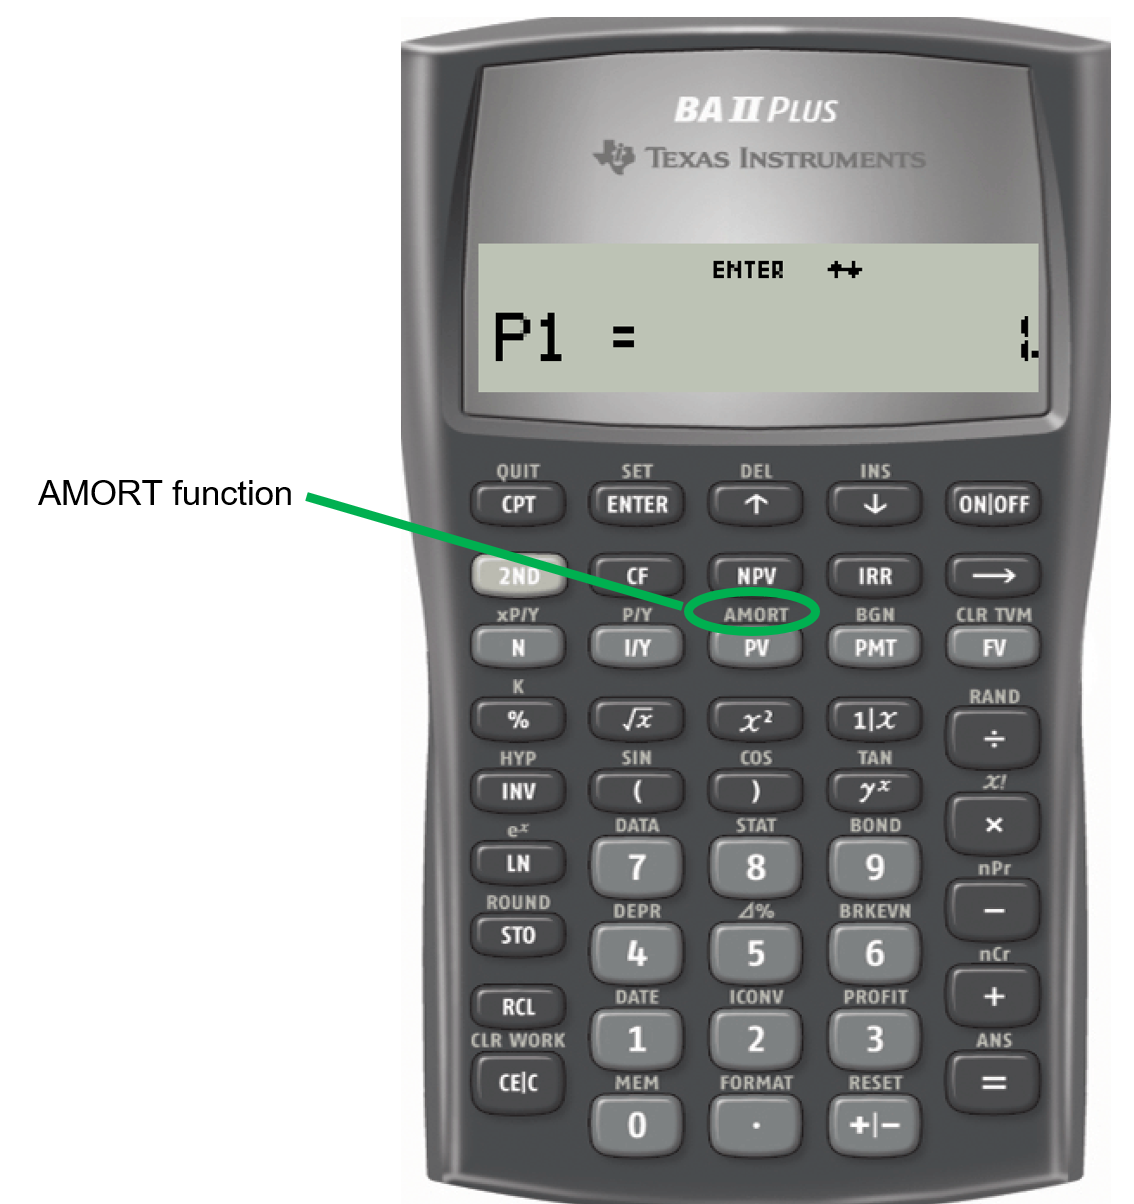 BAII Plus Calculator indicating the button for the AMORT Function.